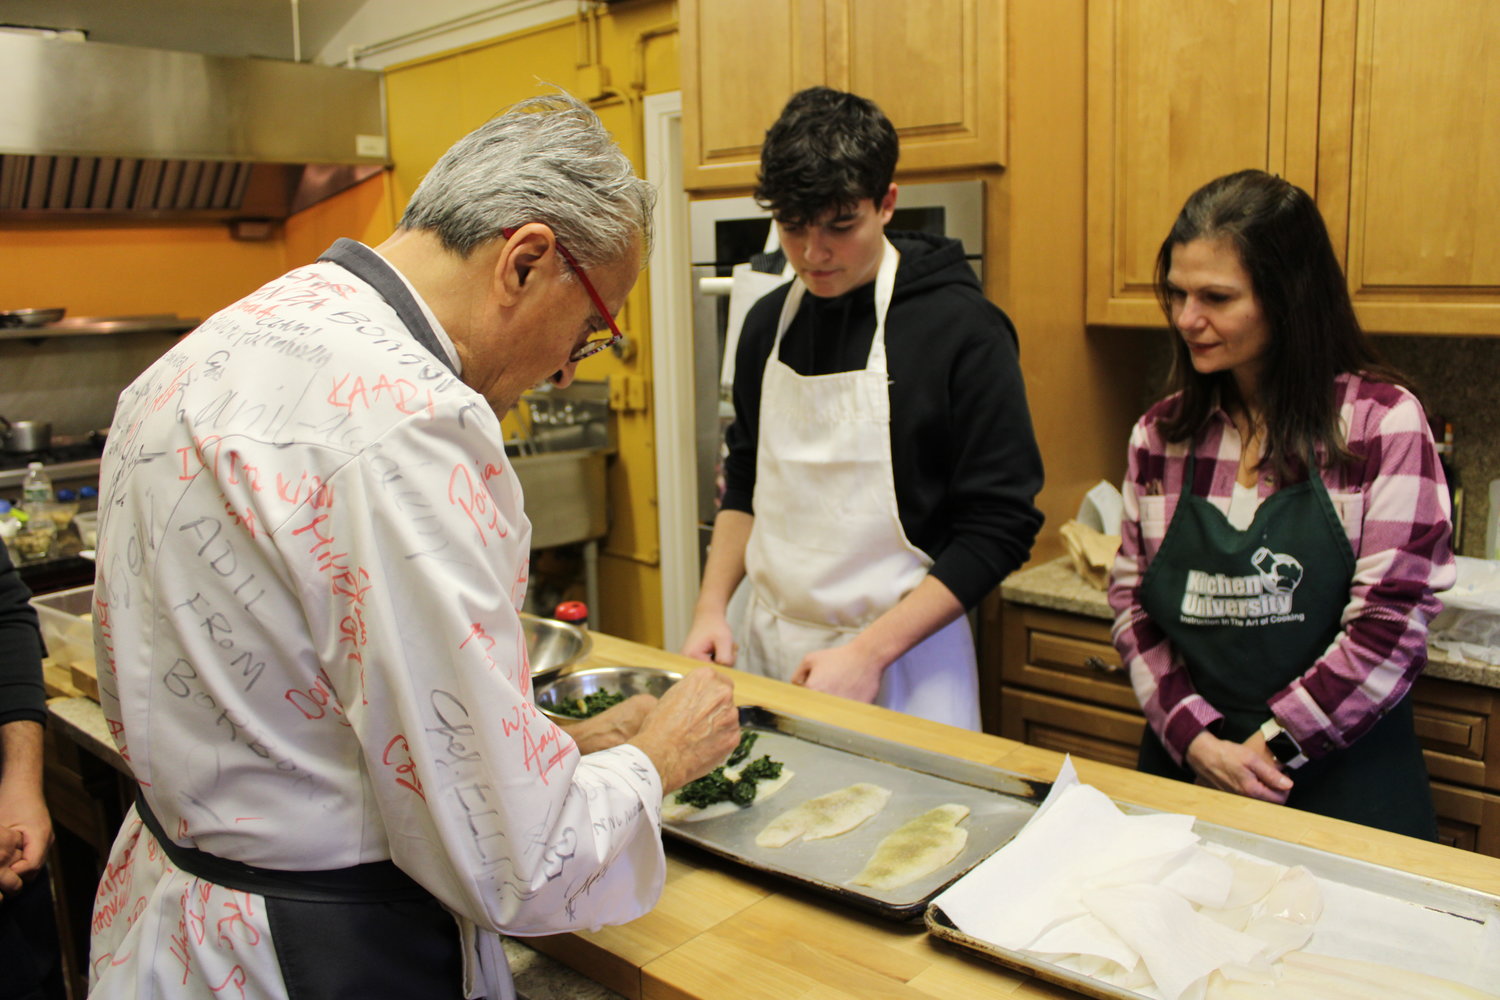 STUFF YOUR SOLE: Chef Walter demonstrates to Mike and Dee Schena how to properly add a spinach filling to the fish the class is preparing.  